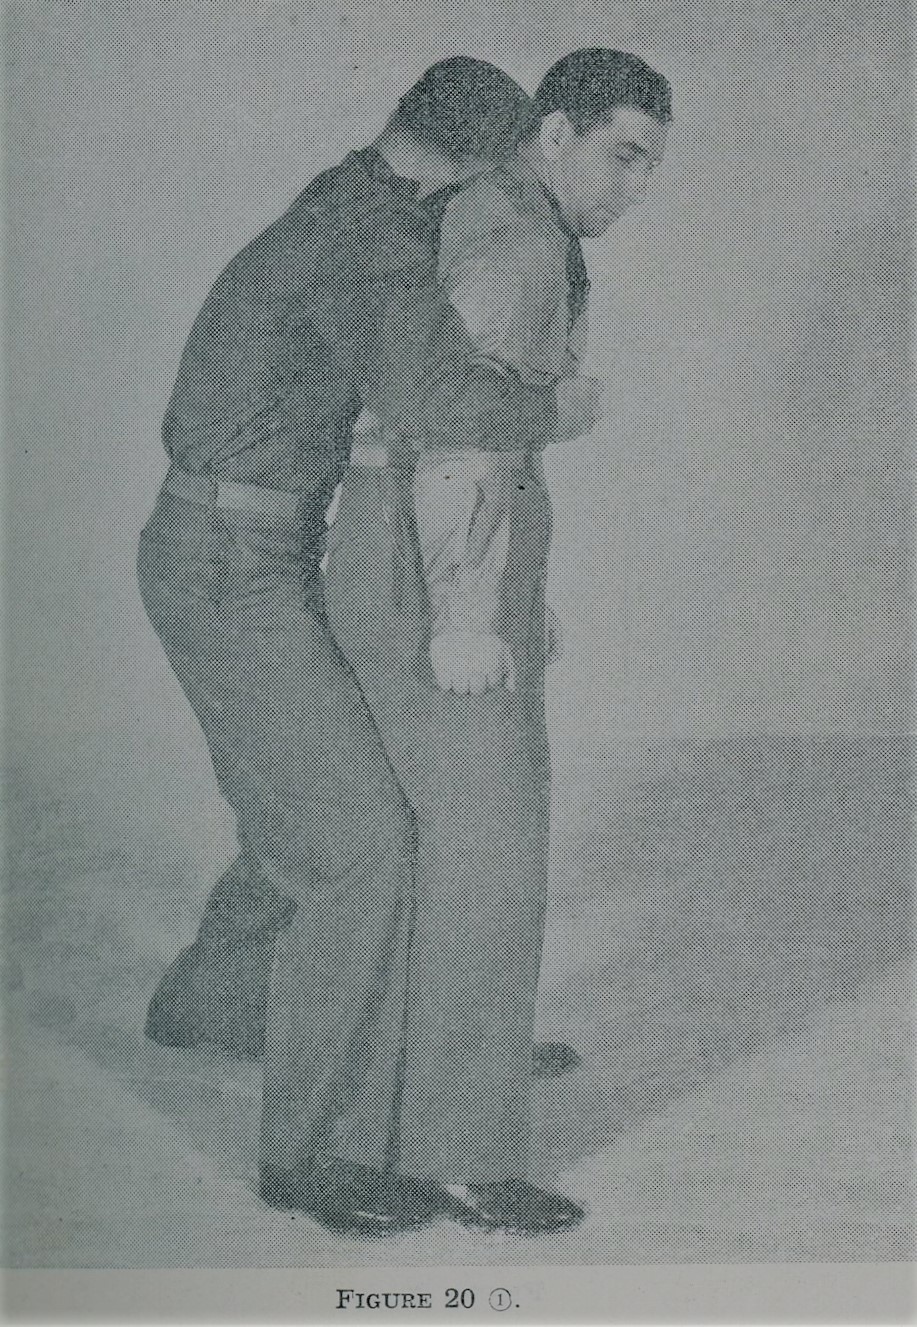 Man escaping from first rear overarm body hold during self defense.